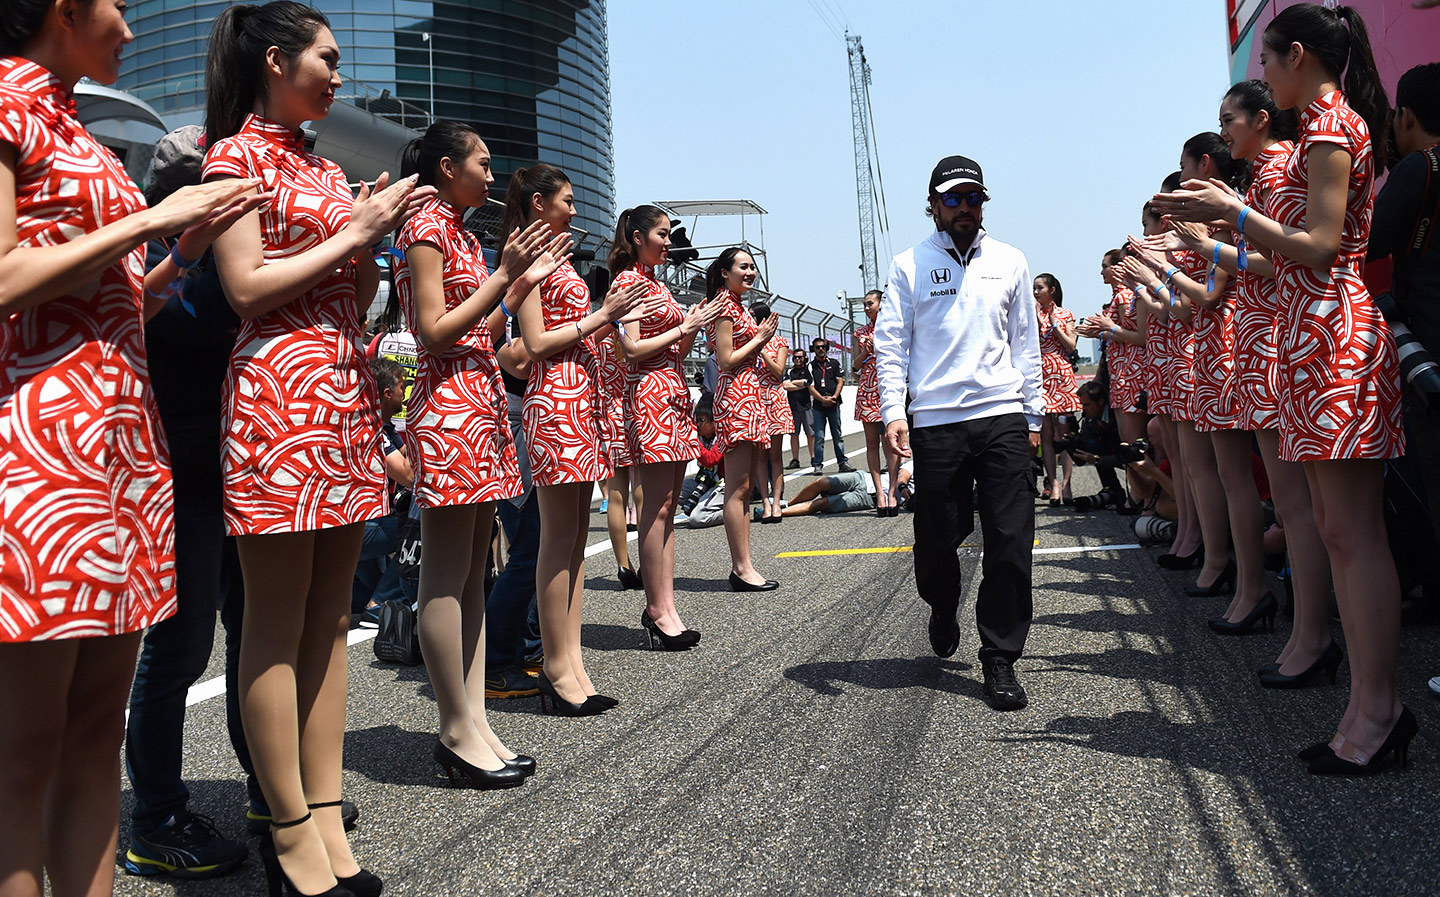 Grid girls banned in F1